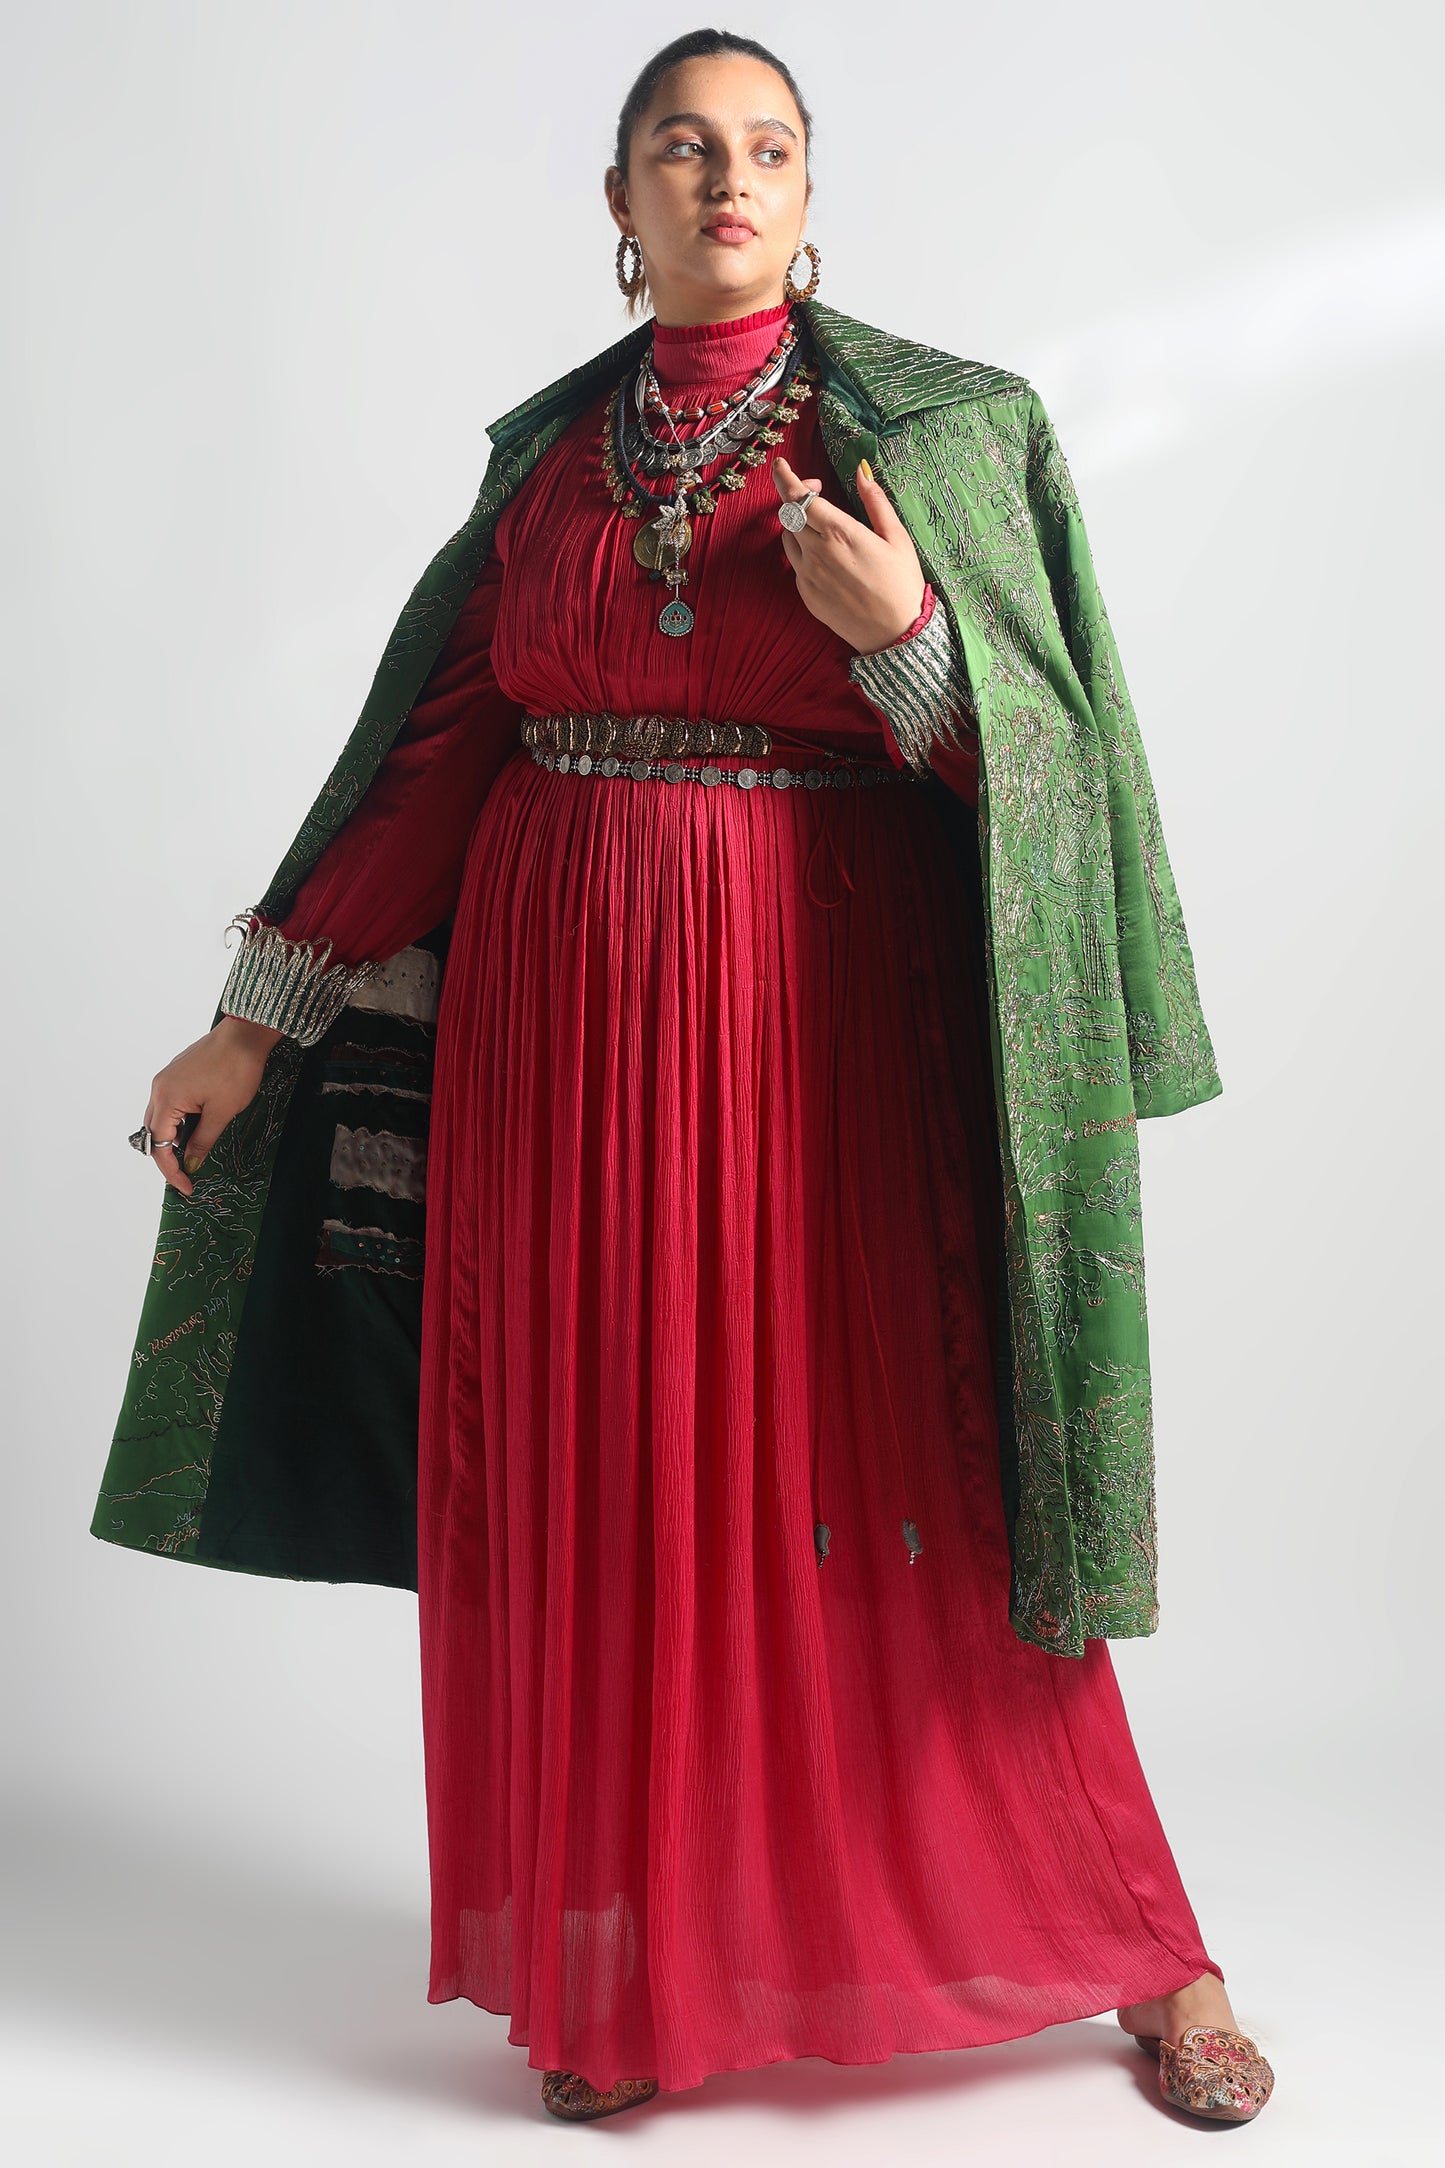 Valdivian Landscape Robe Coat and Rumi Pink Gown